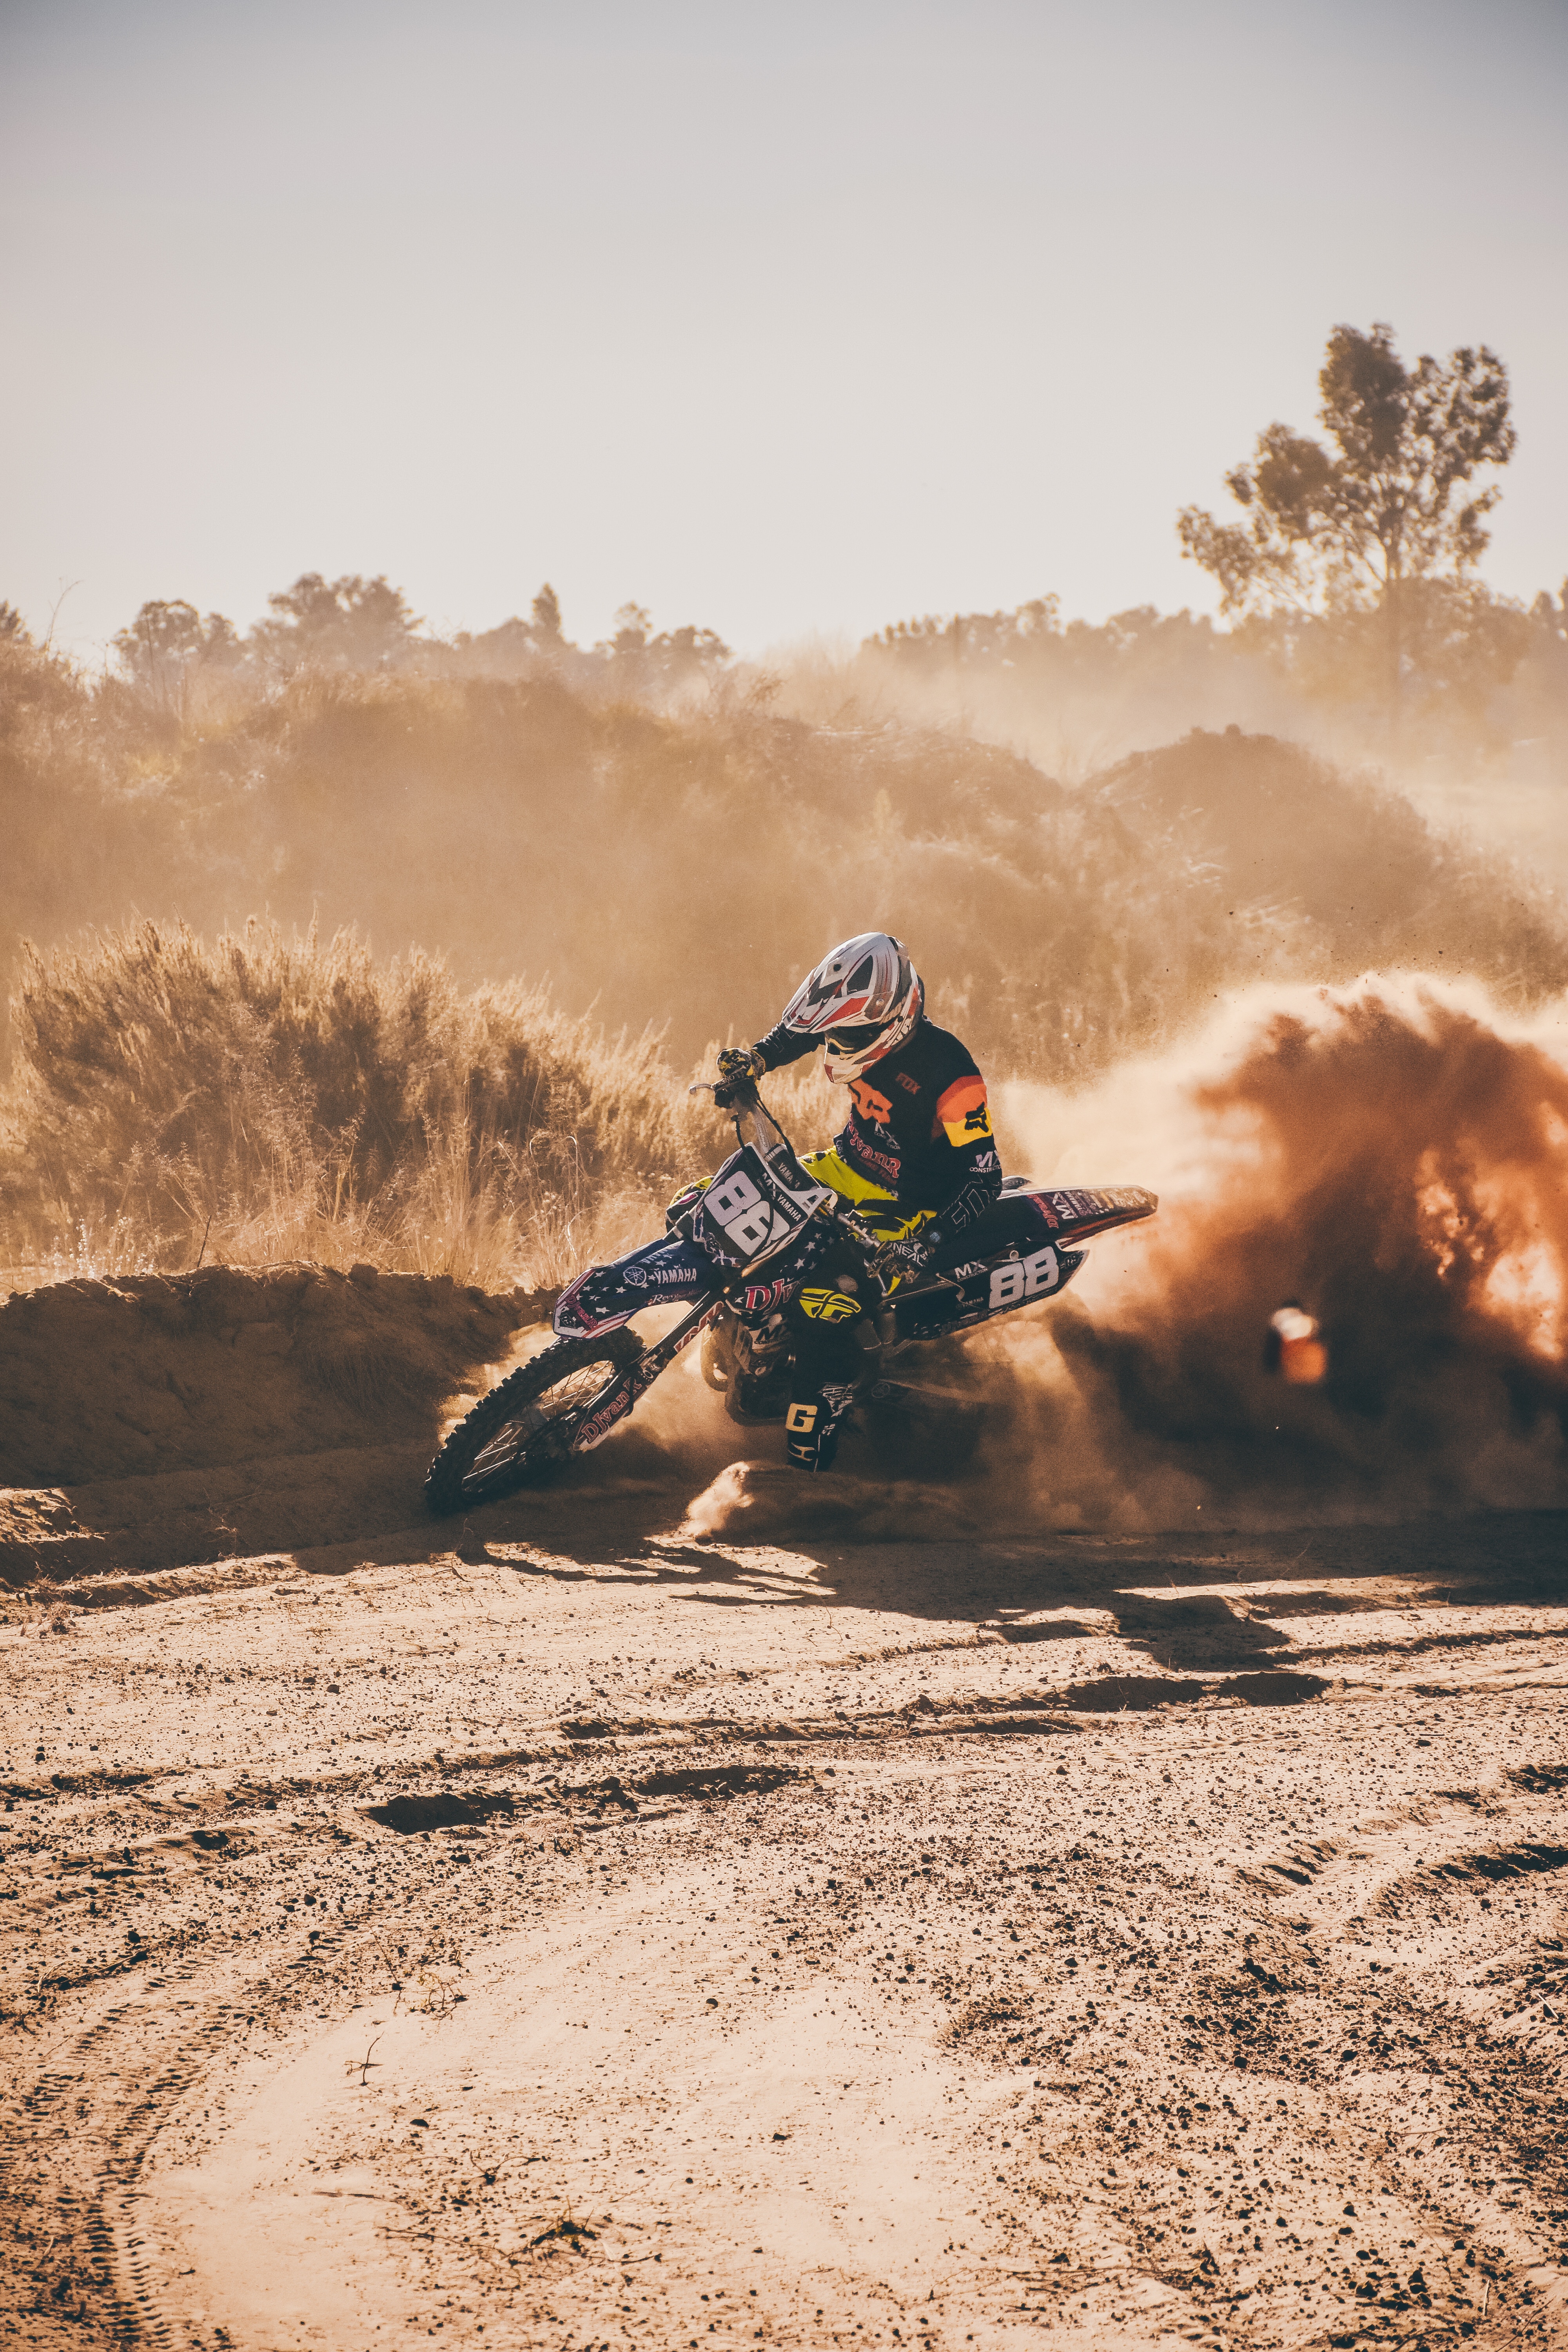 Wallpaper Full HD off road, sports, rally, races, motorcyclist, motorcycle, impassability, drift